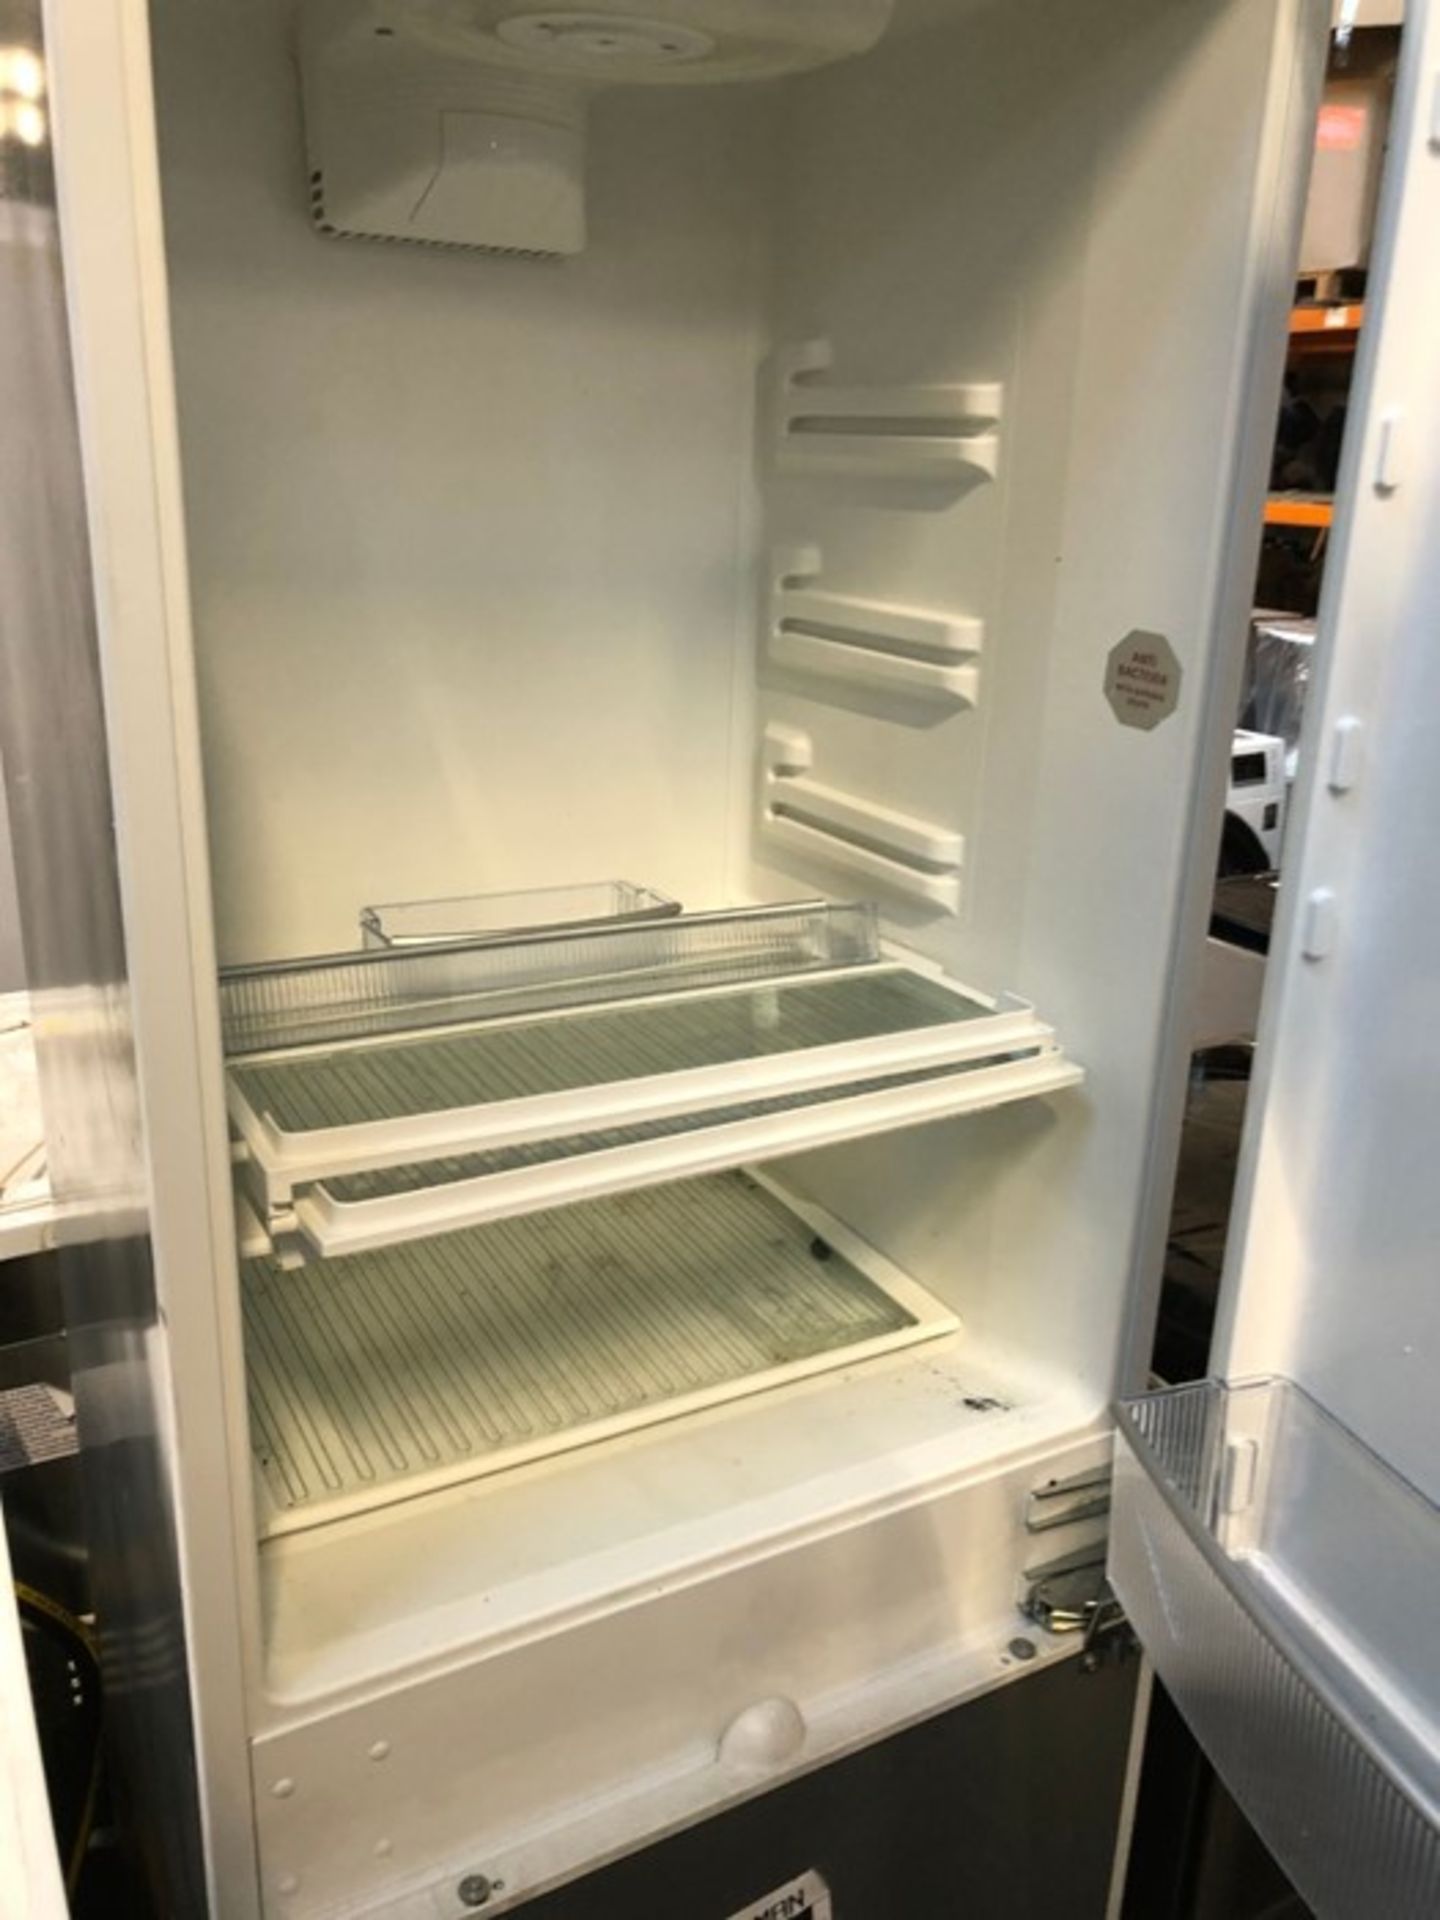 NEFF INTEGRATED FRIDGE FREEZER - K9724X4GB/06 / RPP £699.00 / UNTESTED, USED. TWO DINTS ON RIGHT - Image 3 of 6